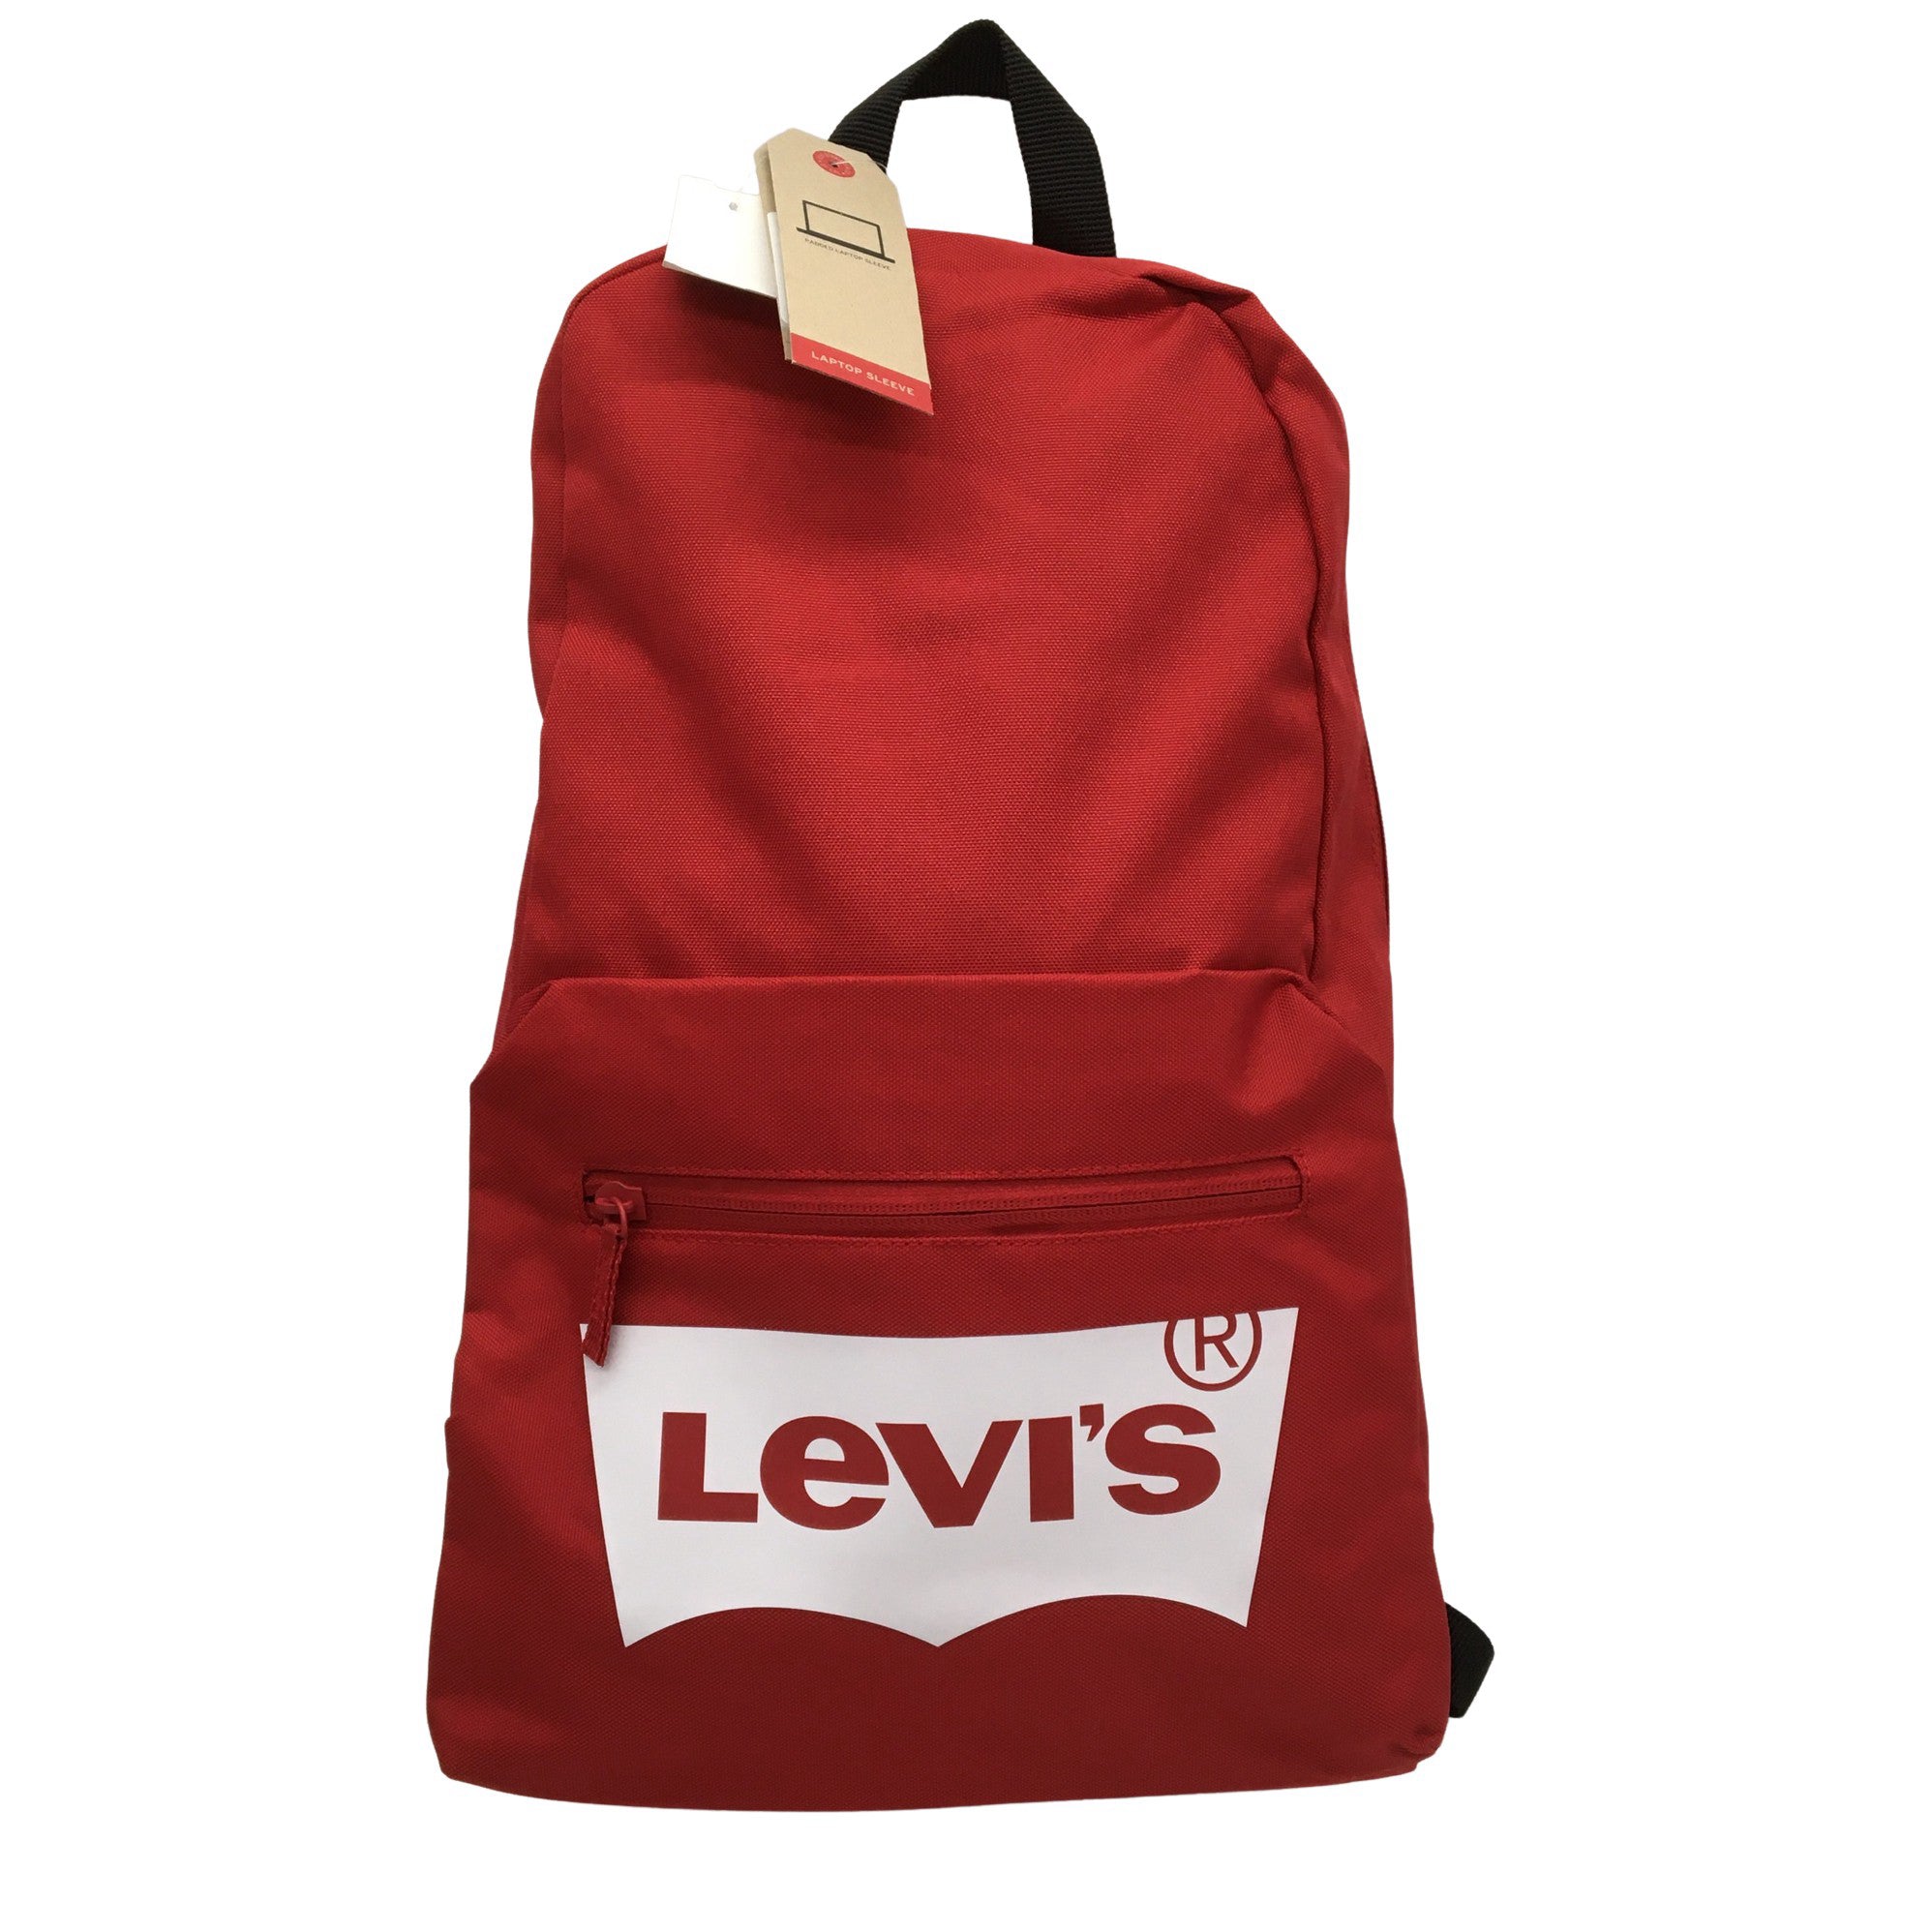 Buy Levi's Standard Pack from £19.99 (Today) – Best Deals on idealo.co.uk